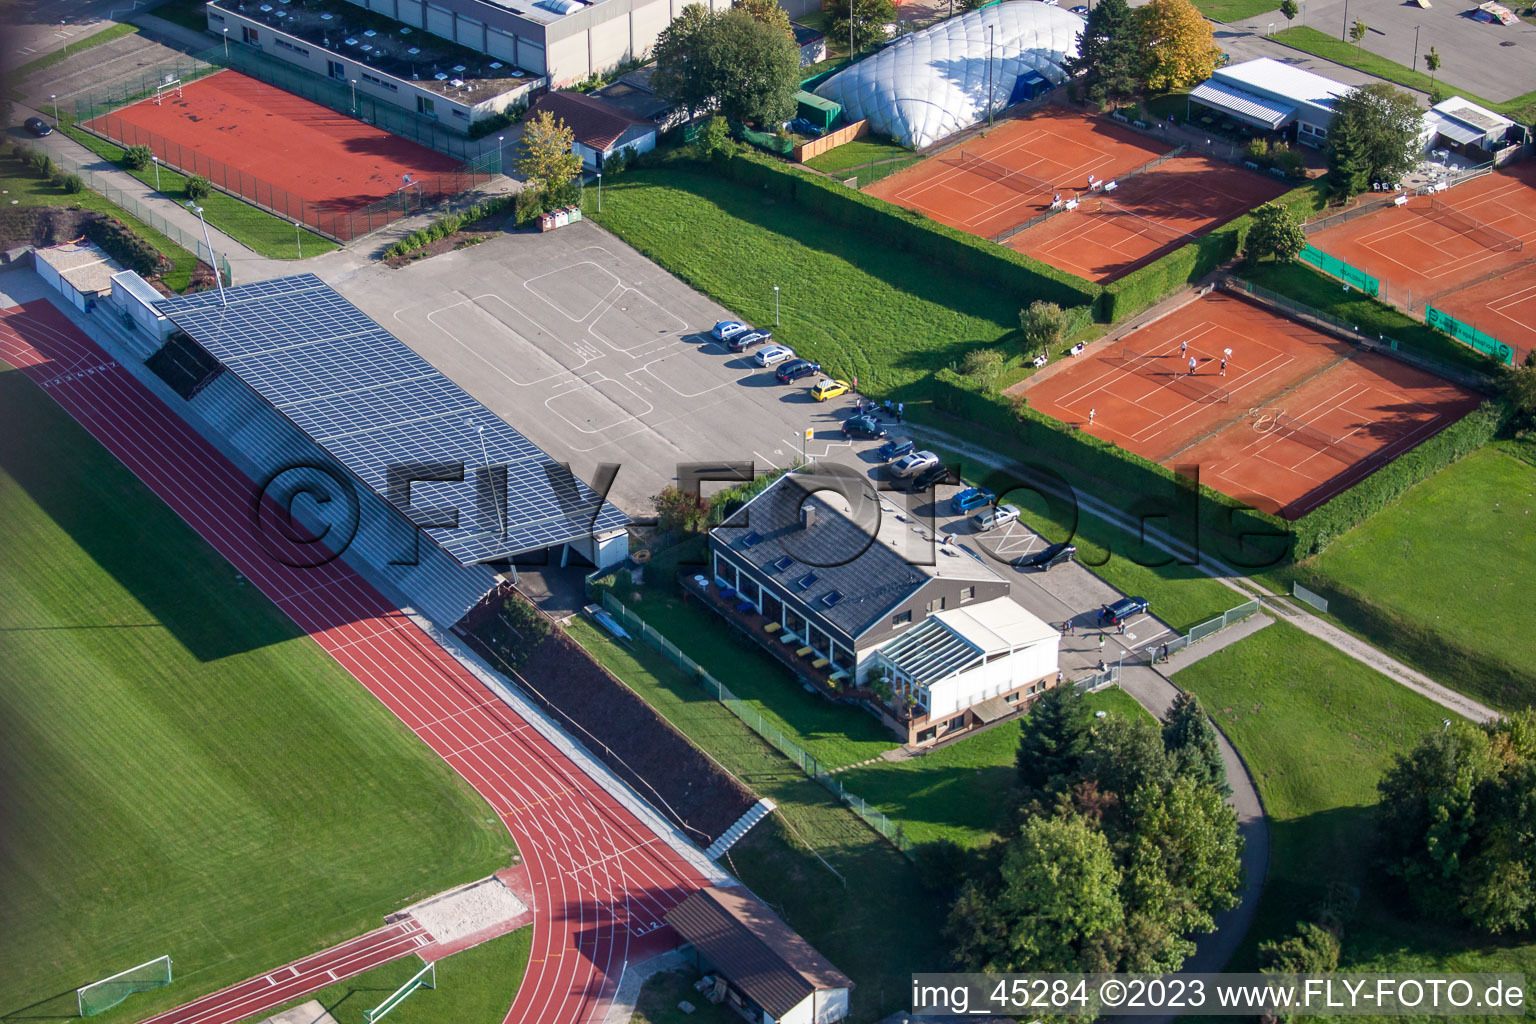 Sports grounds of SV-1899 eV Langensteinbach in the district Langensteinbach in Karlsbad in the state Baden-Wuerttemberg, Germany seen from a drone